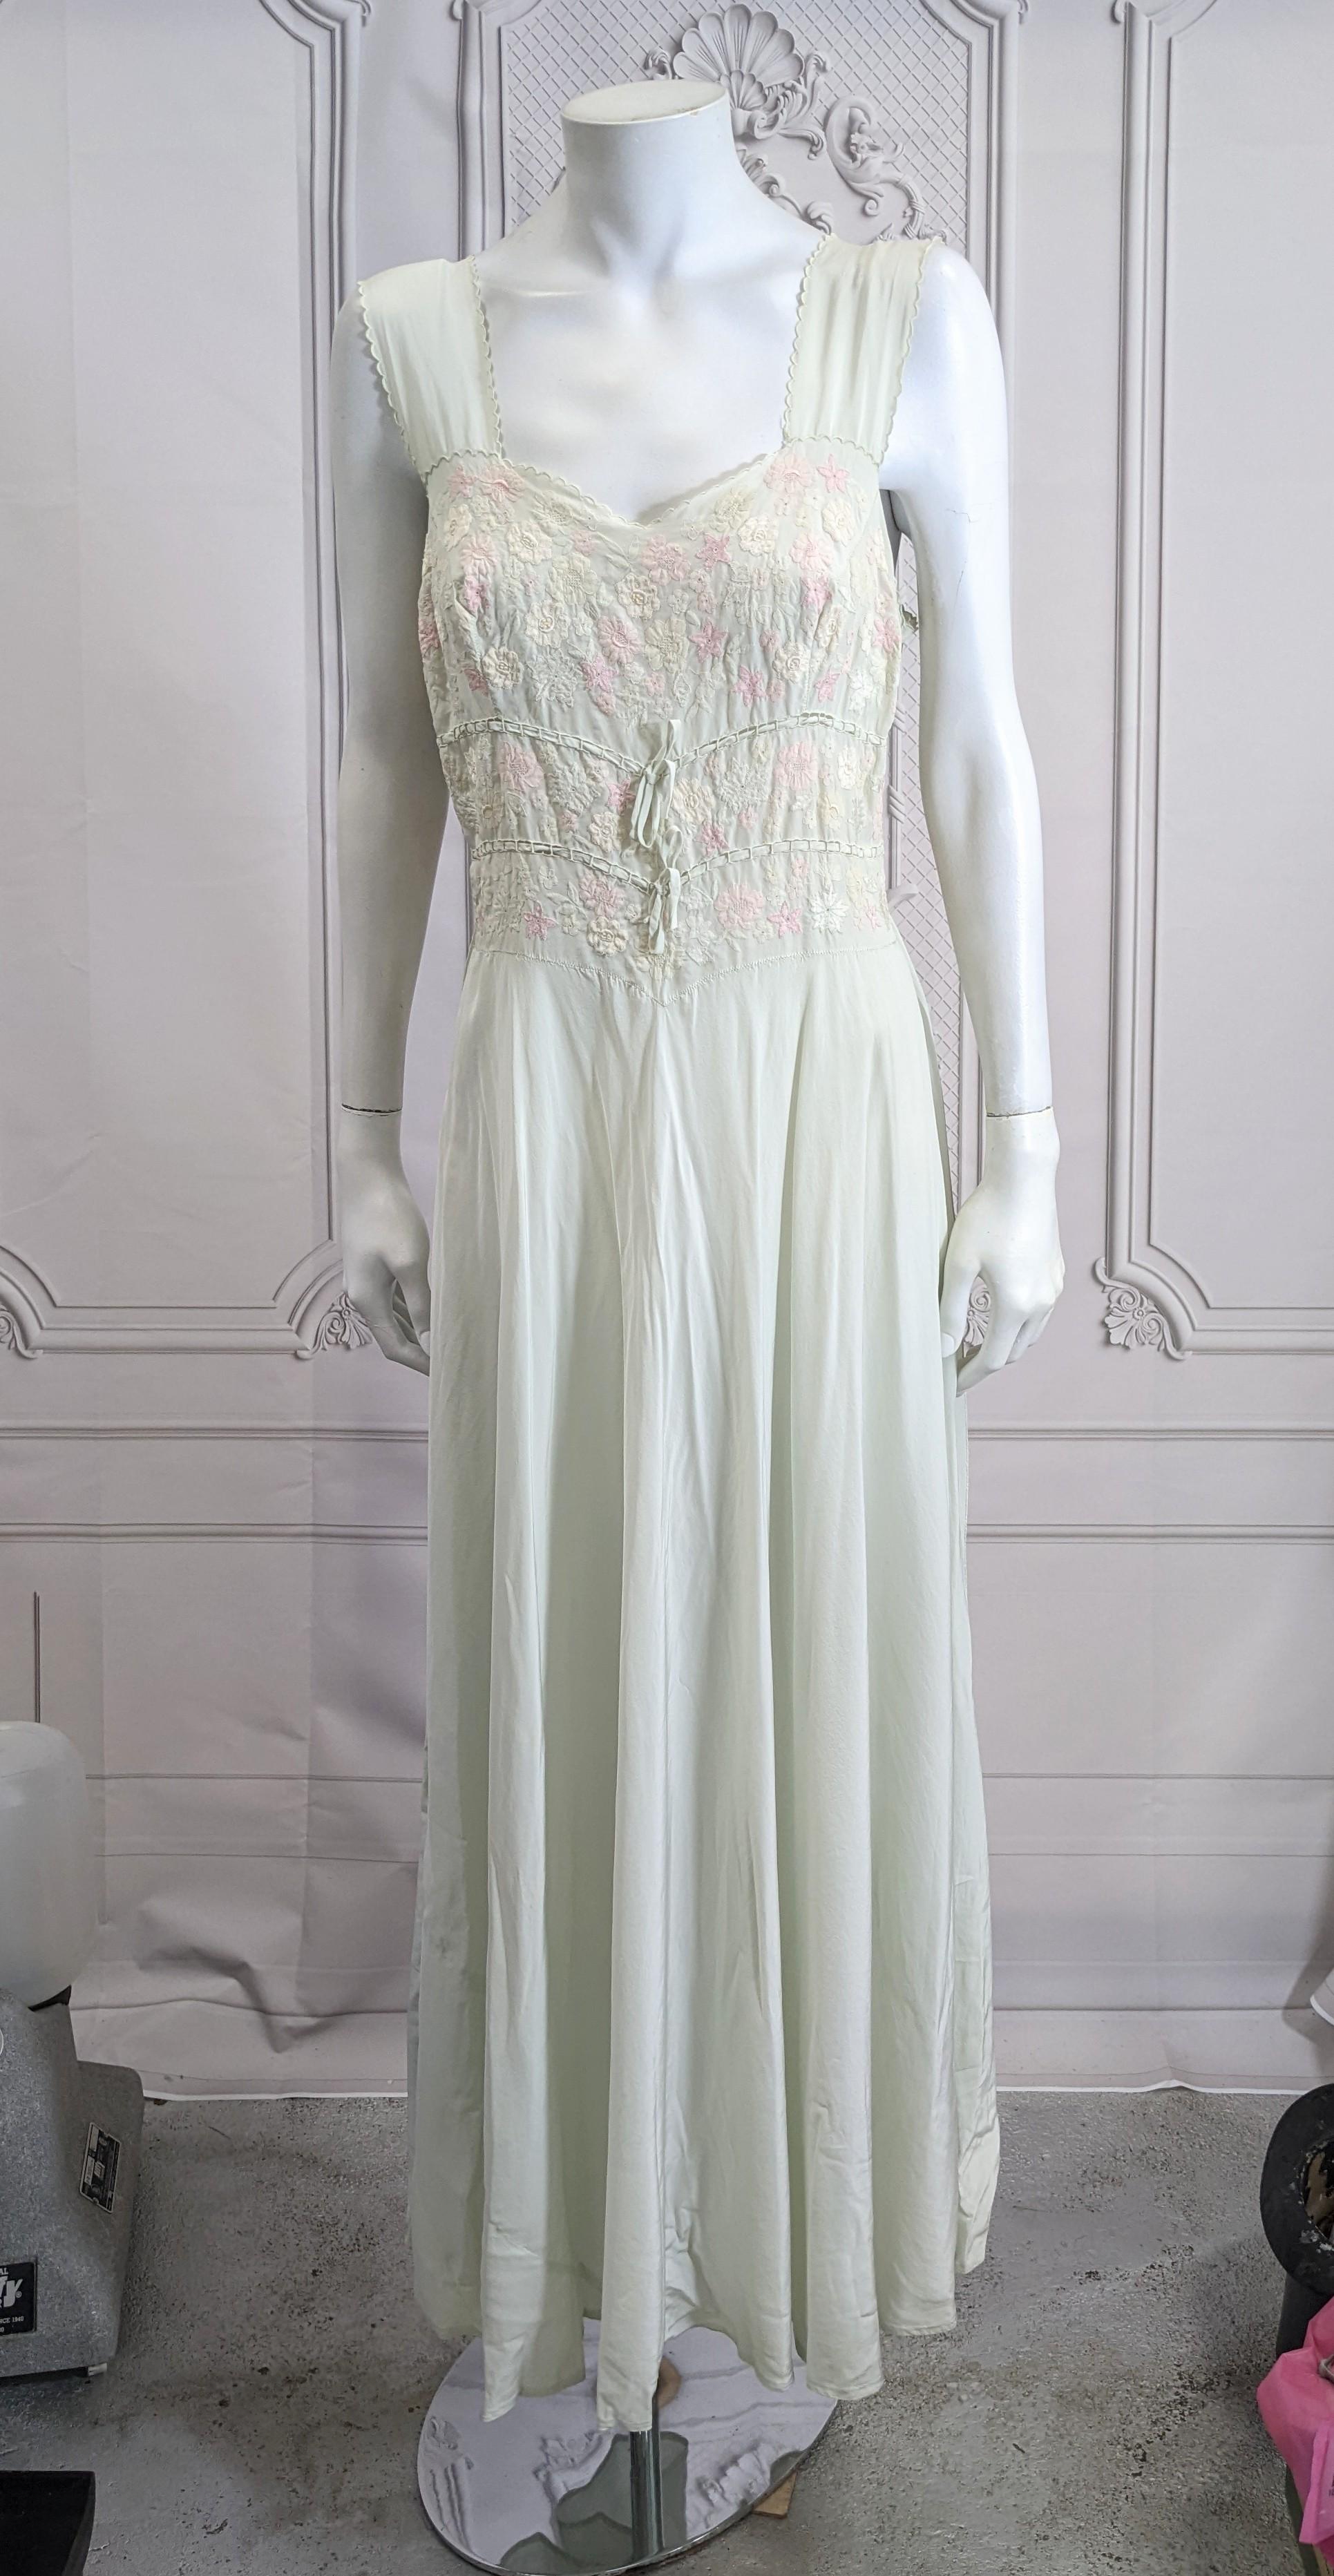 Art Deco Pastel Silk Crepe Floral Invisibly Embroidered Slip Gown. Bodice completely covered in pastel re-embroidered florals attached to a full skirt and sash. Pale celadon silk crepe with 2 ties along rib cage and wide back sash. Incredible hand